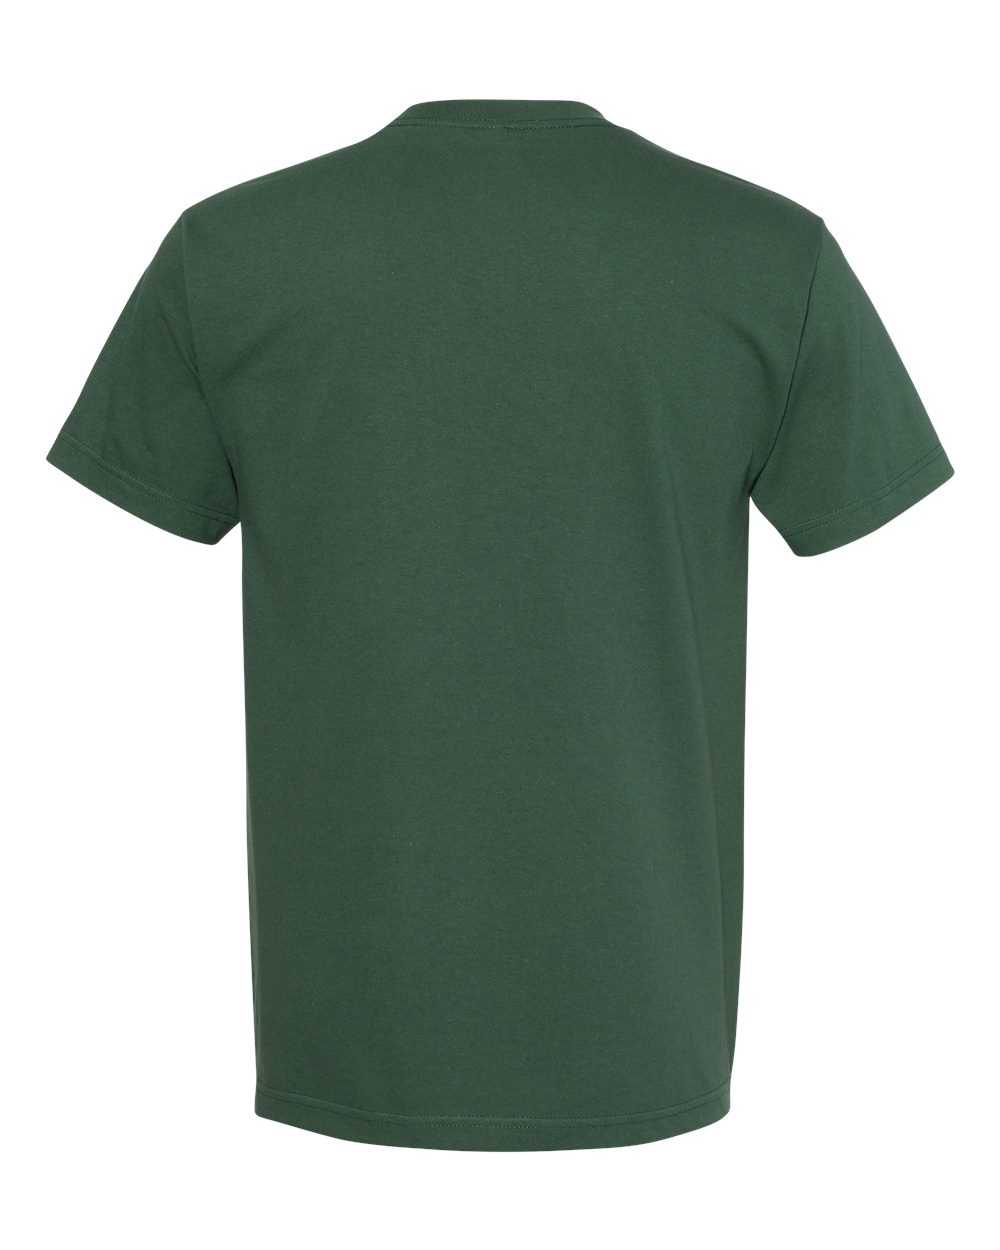 American Apparel 1301 Unisex Heavyweight Cotton T-Shirt - Forest Green - HIT a Double